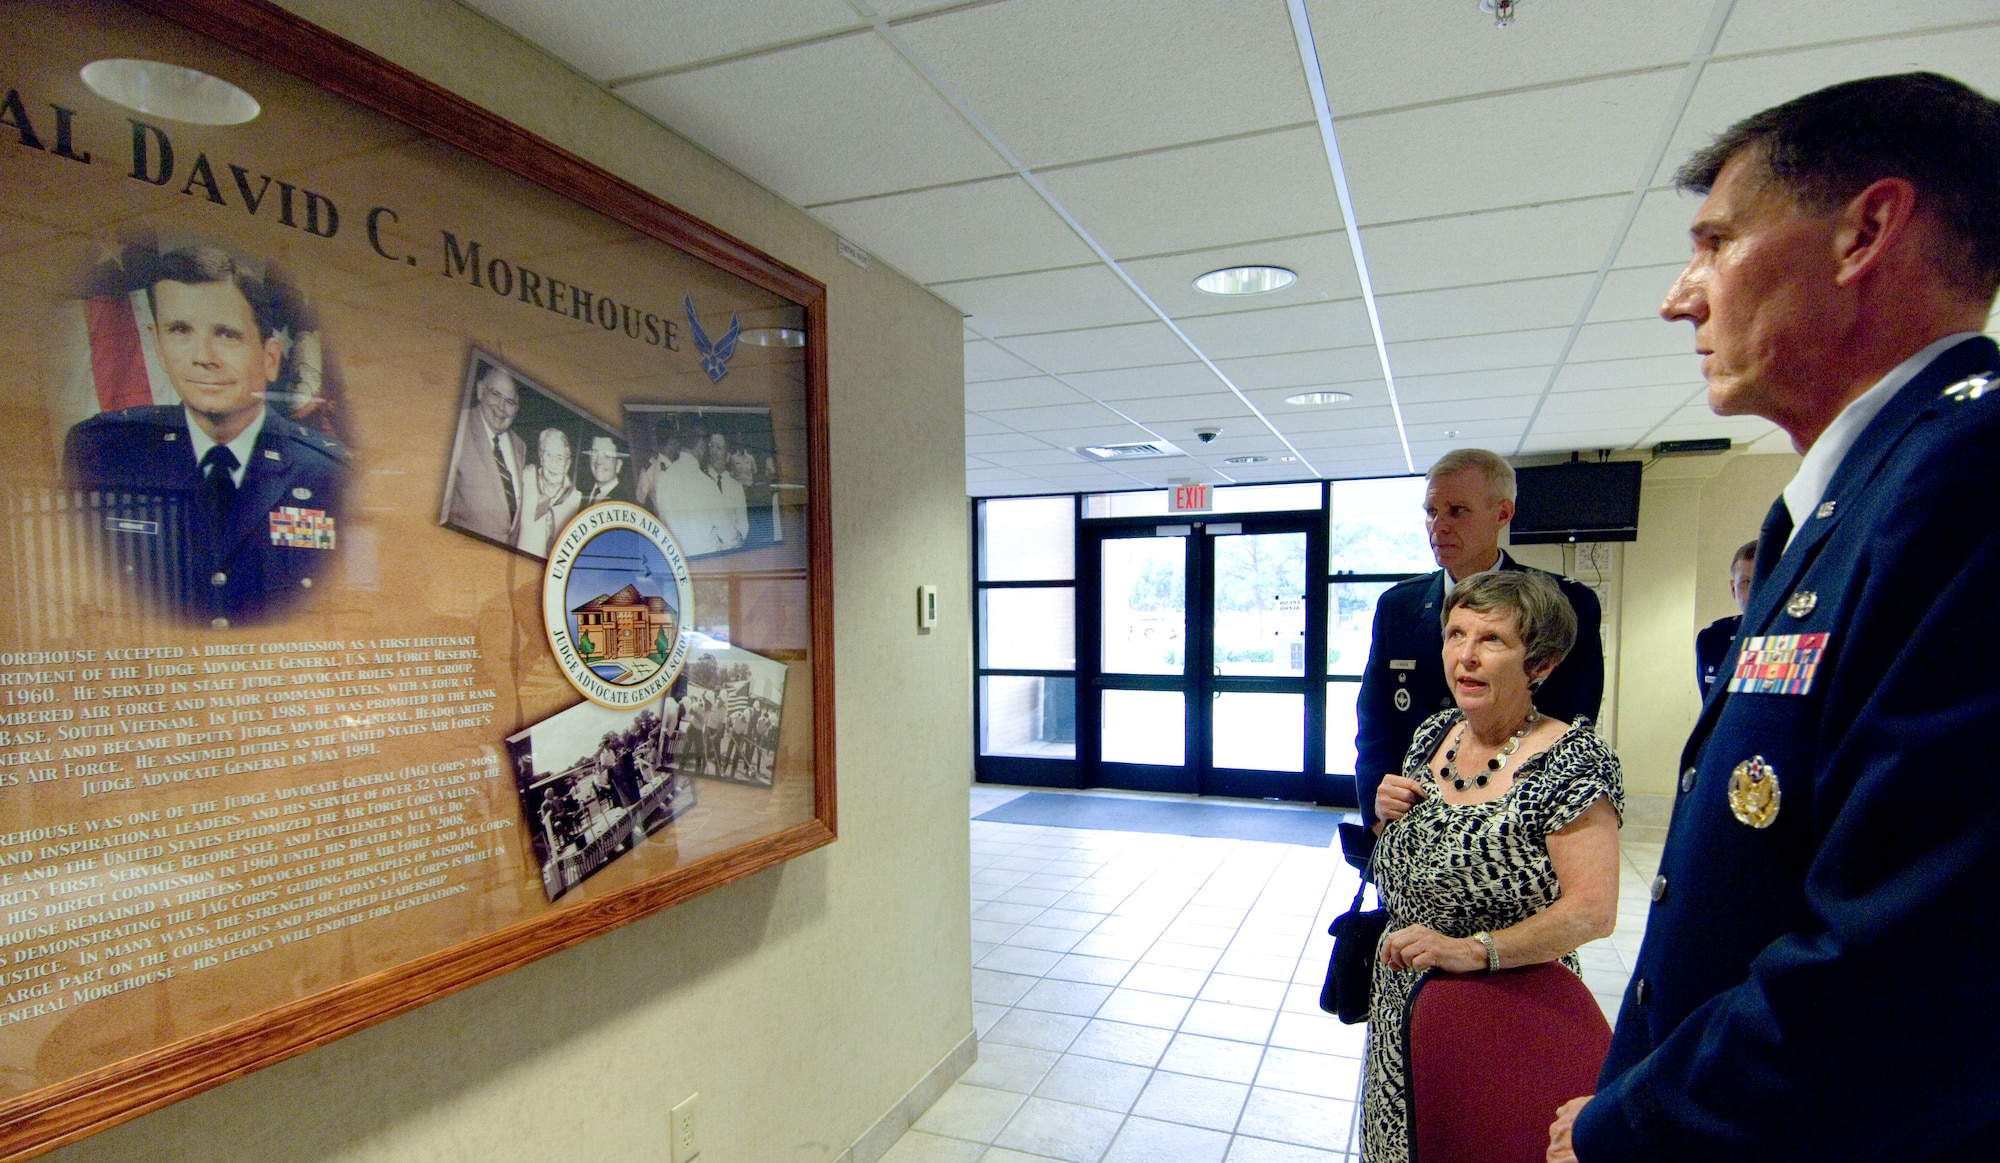 From left, Col. Timothy O’Brien, Sally Morehouse and Lt. Gen. Richard Harding admire the storyboard of retired Maj. Gen. David Morehouse on display in Officer Training School’s Morehouse Hall. The dormitory, Building 1491, was renamed June 24 in honor of General Morehouse, who was Judge Advocate General, Headquarters U.S. Air Force, from 1991 to 1993. (U.S. Air Force Photo/Melanie Rodgers Cox)